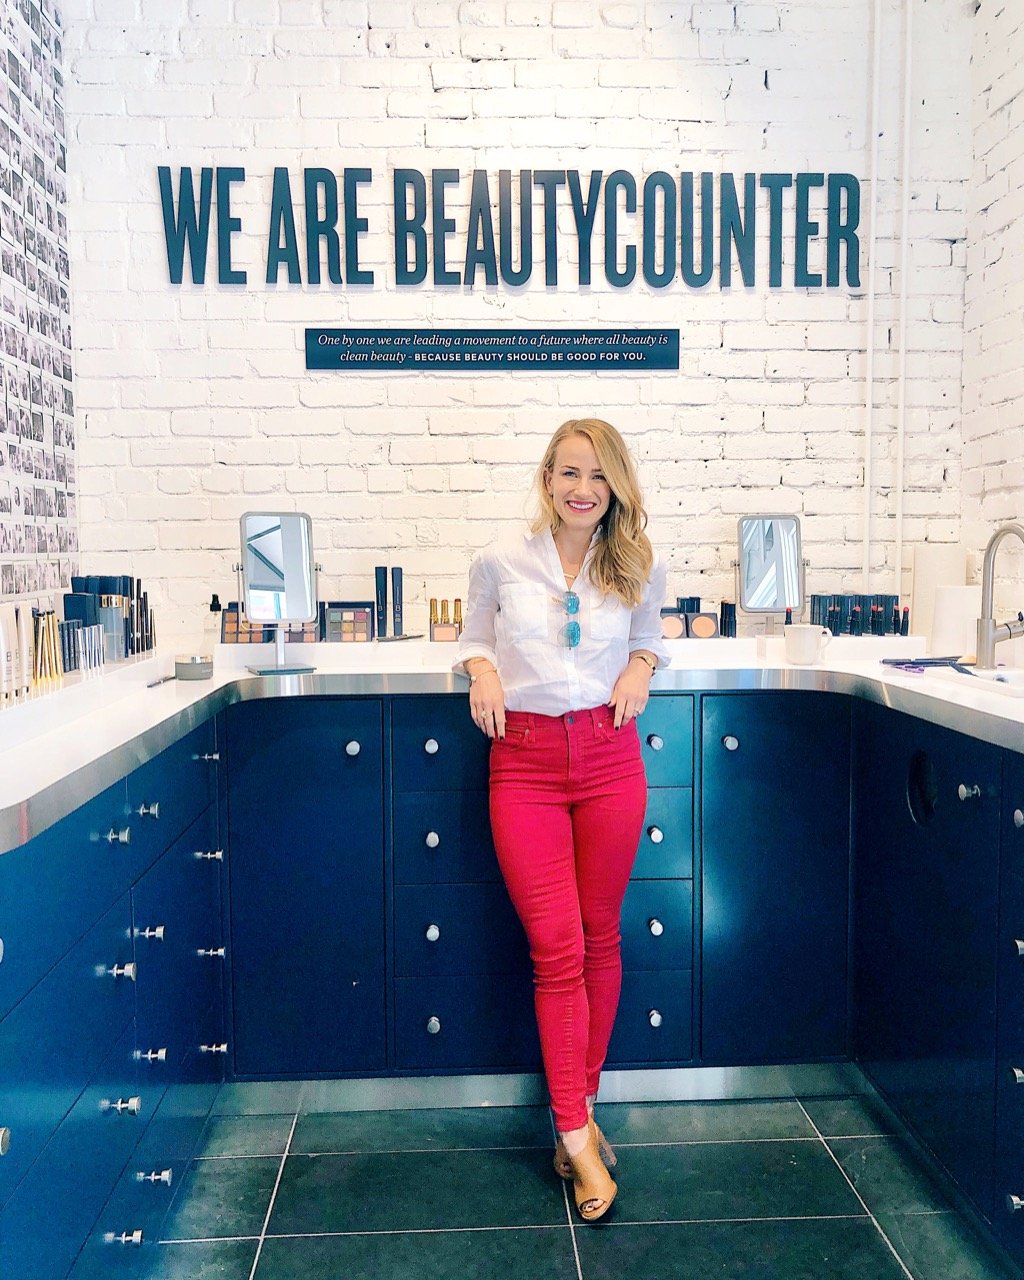 Beautycounter Compensation Plan Explained